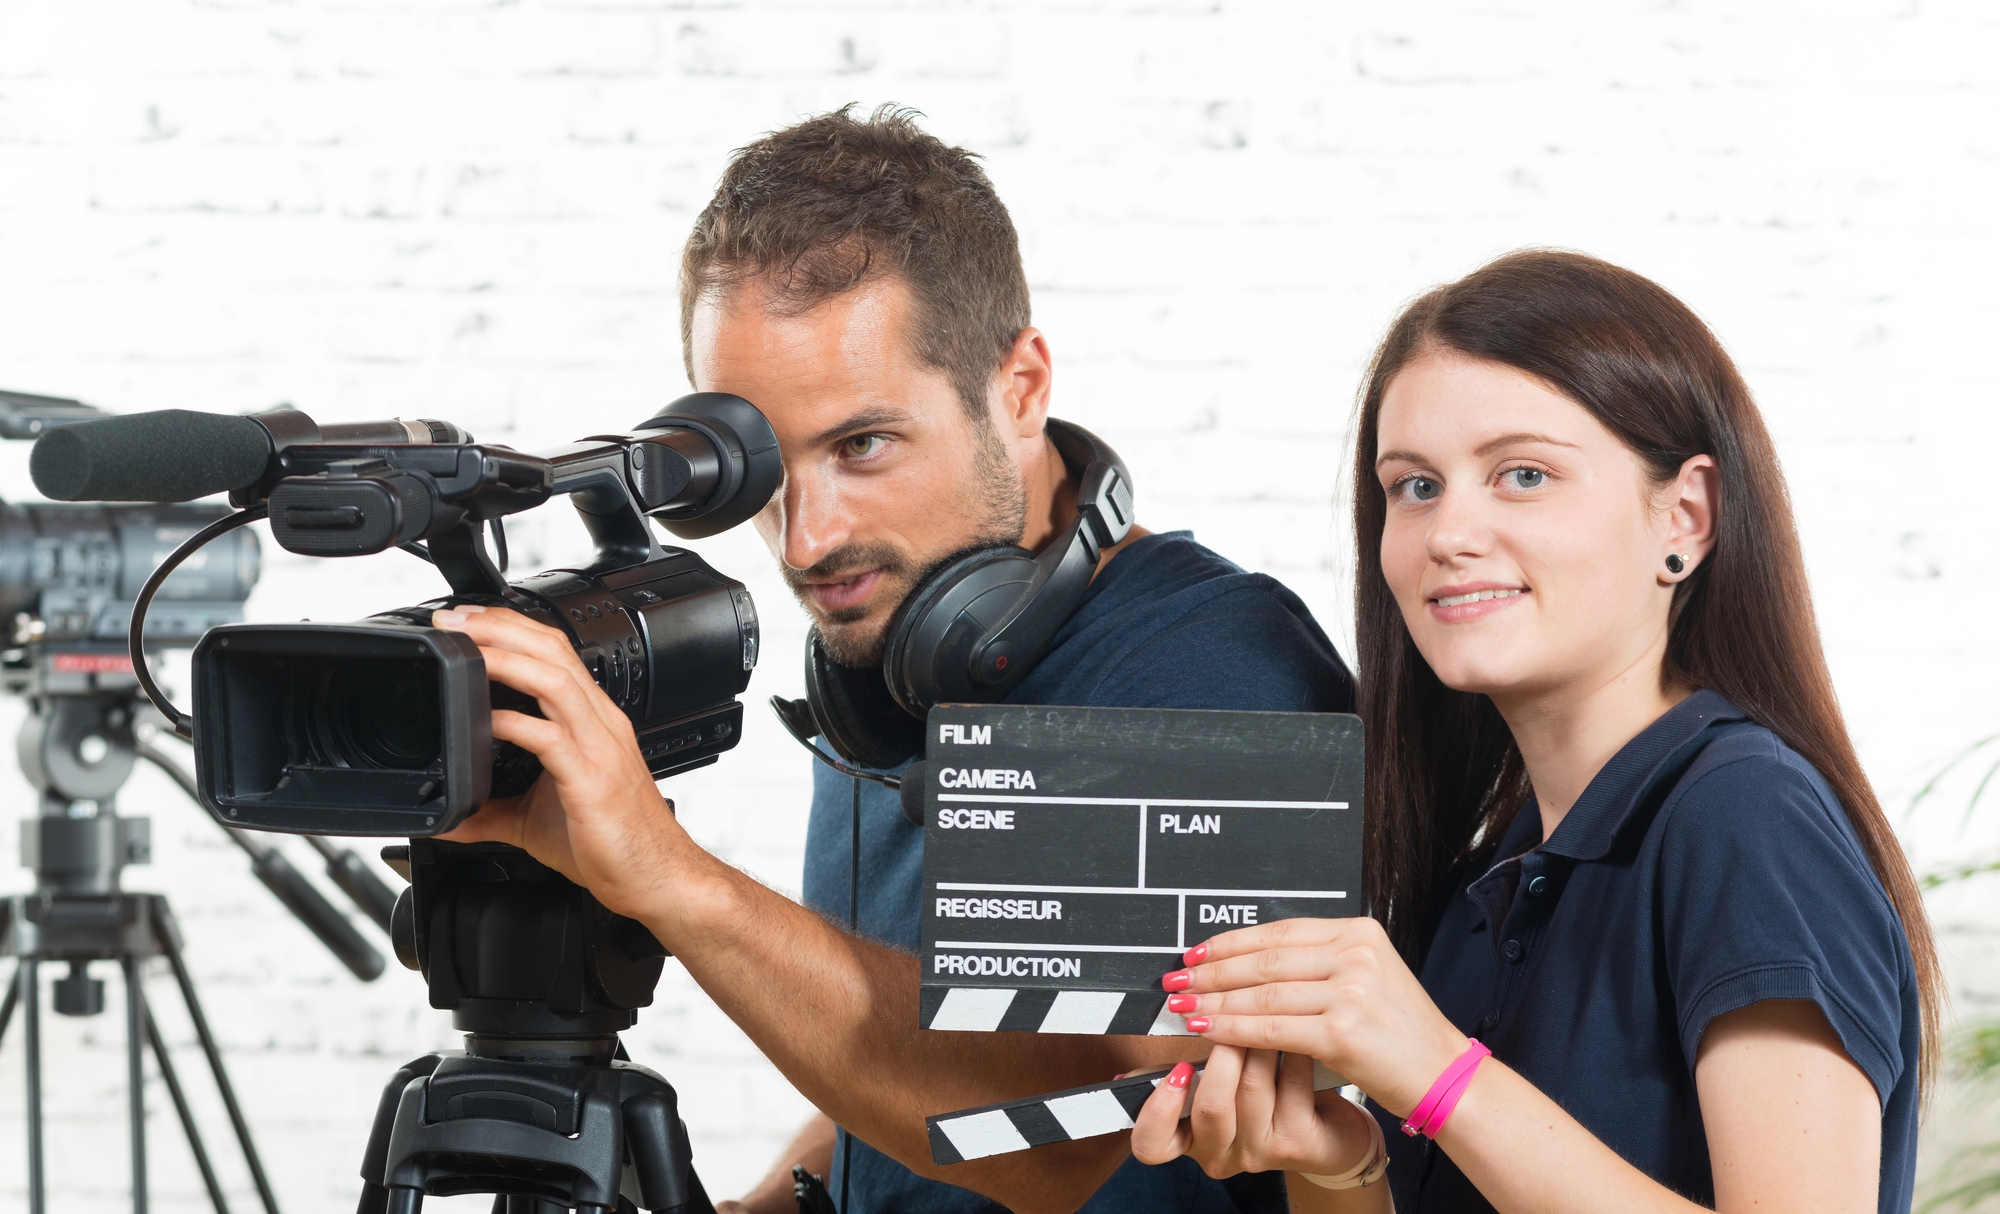 A cameraman and a young woman with a movie camera